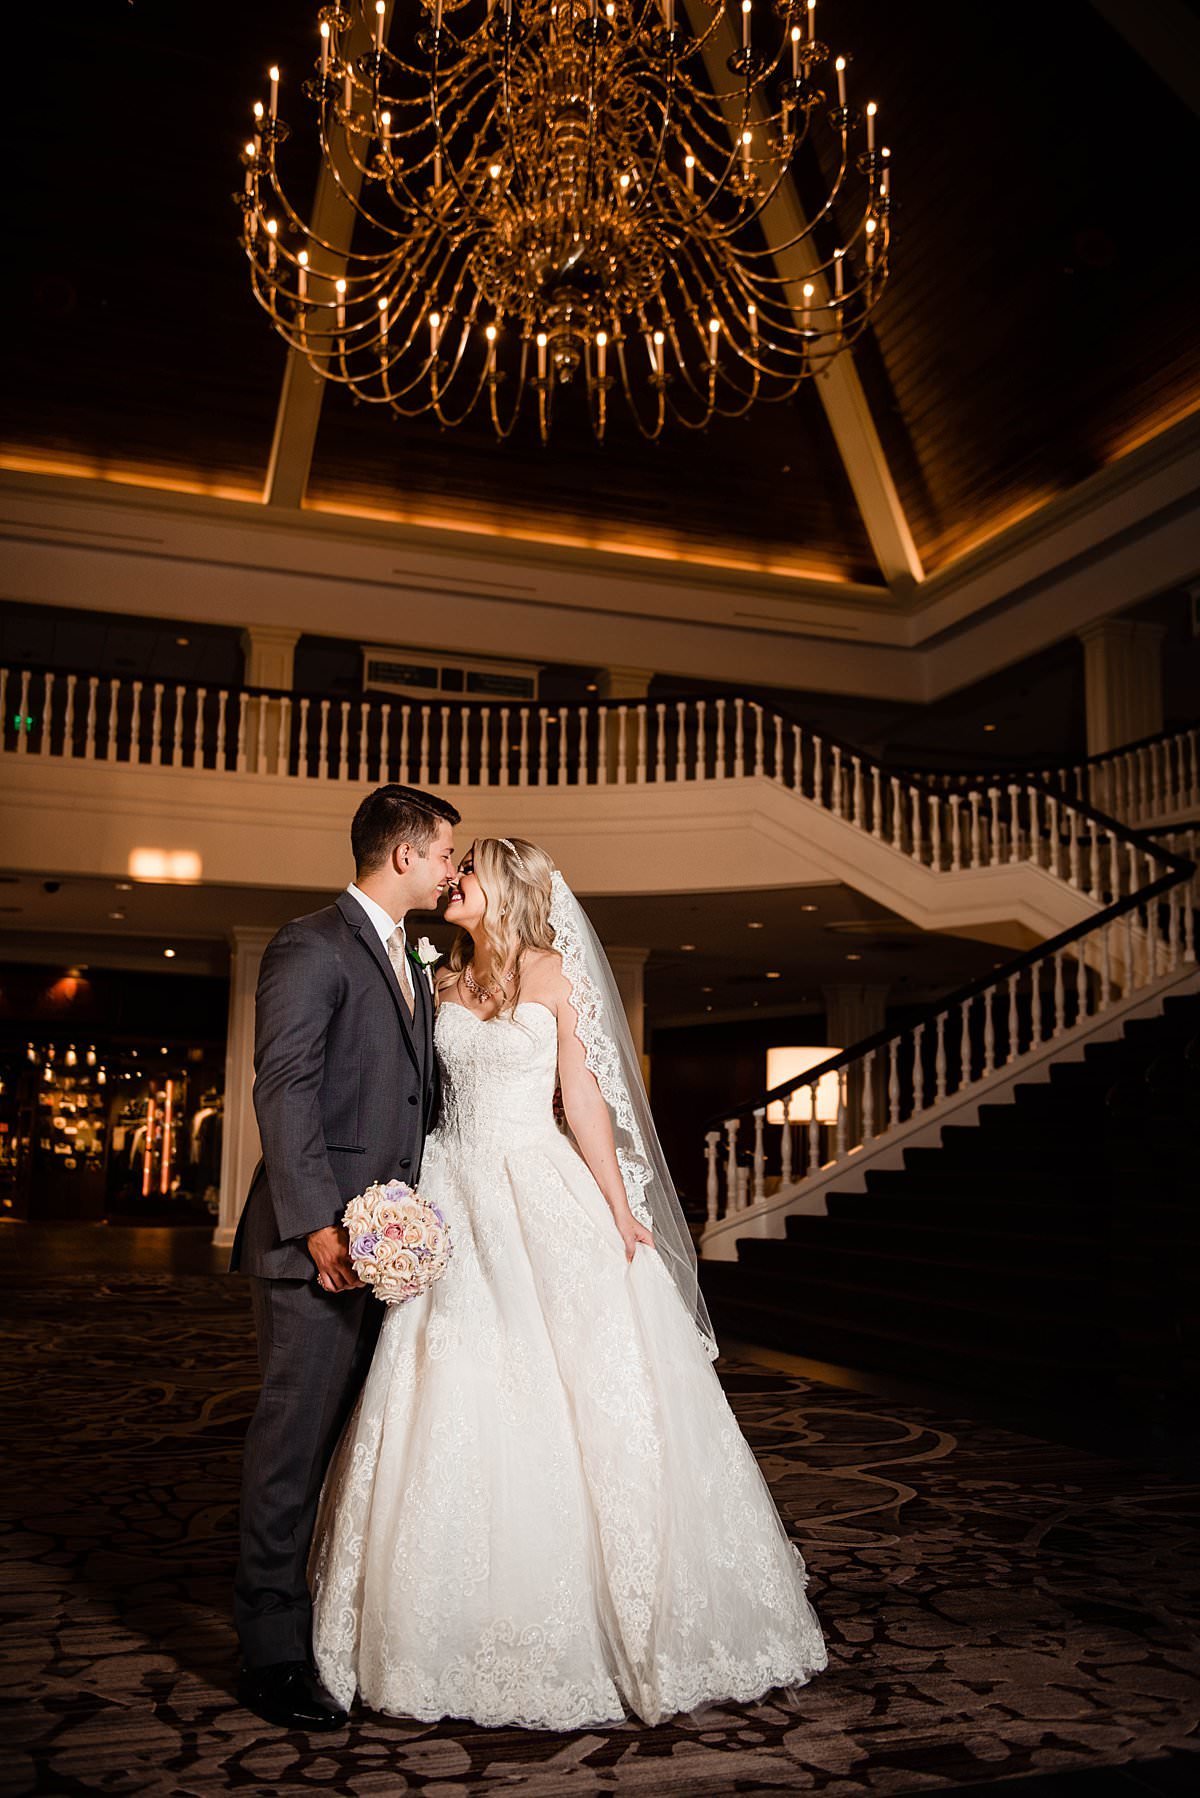 Bride and groom standing near large staircase at Gaylord Opryland with chandelier above them